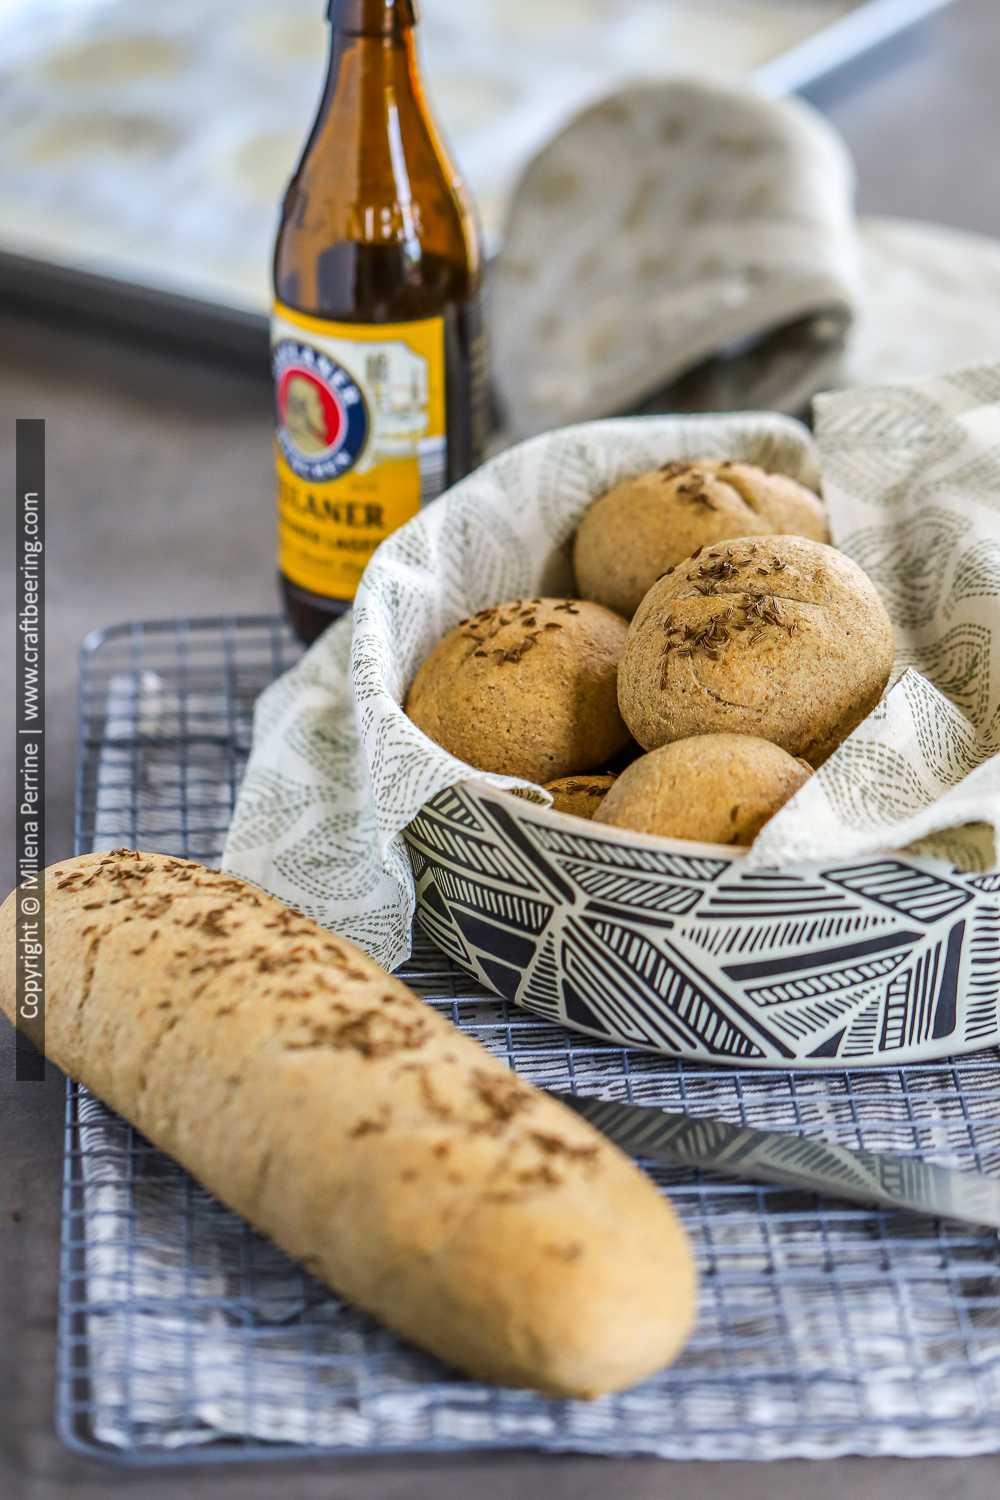 German beer bread with yeast, classic recipe with rye flour.